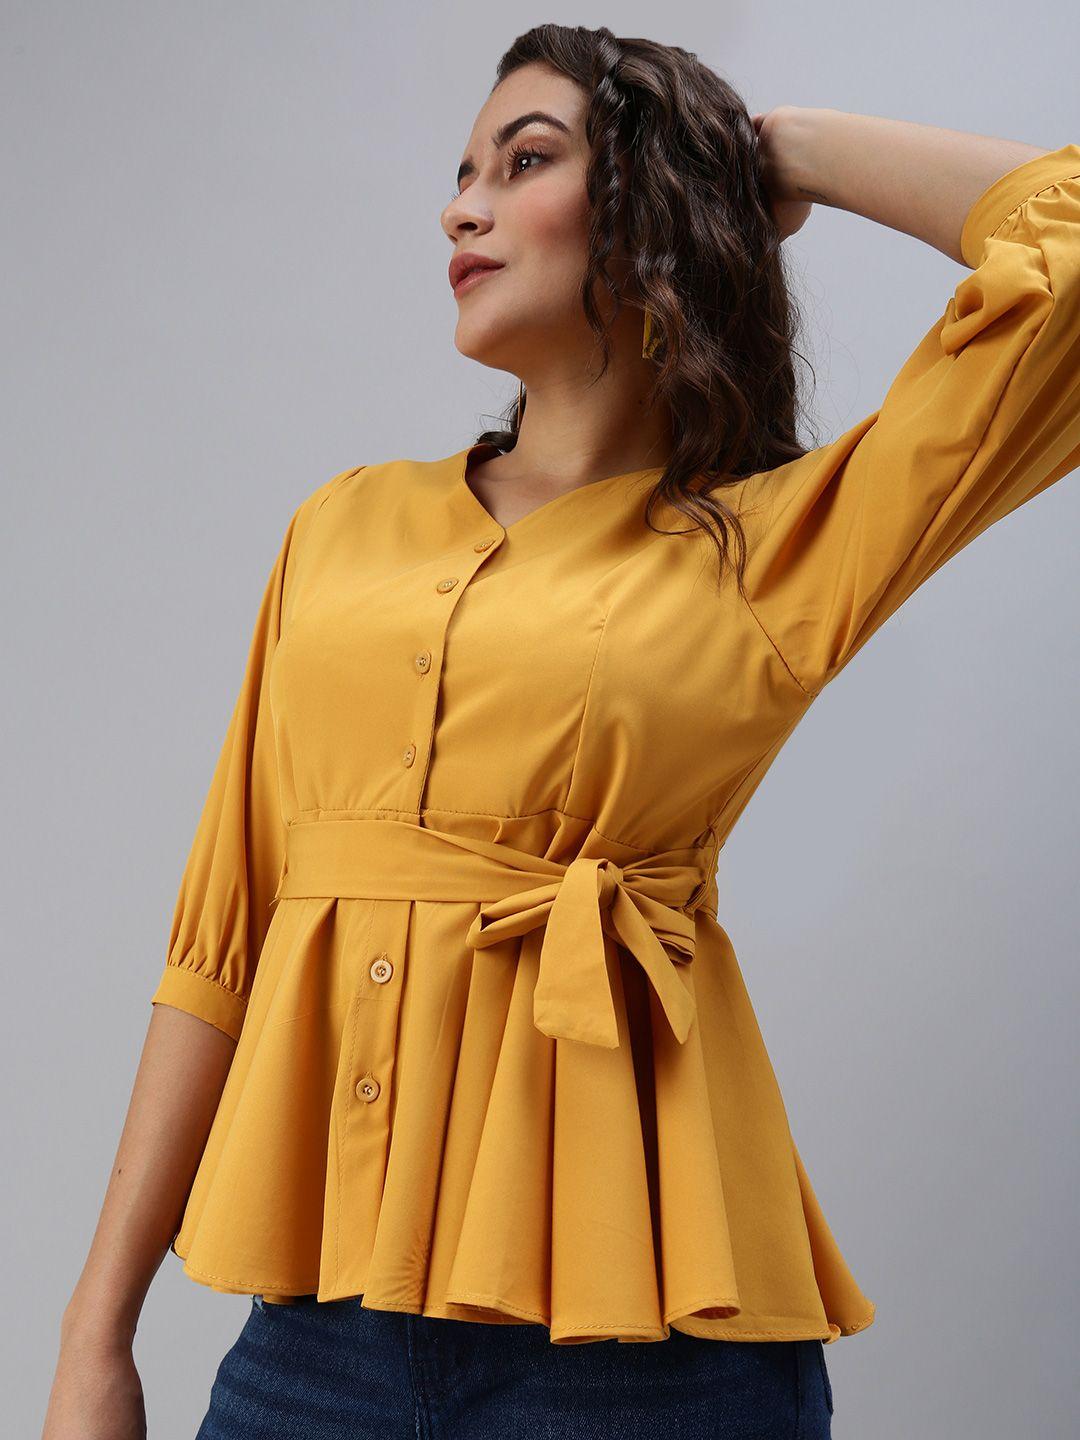 showoff mustard yellow crepe cinched waist top